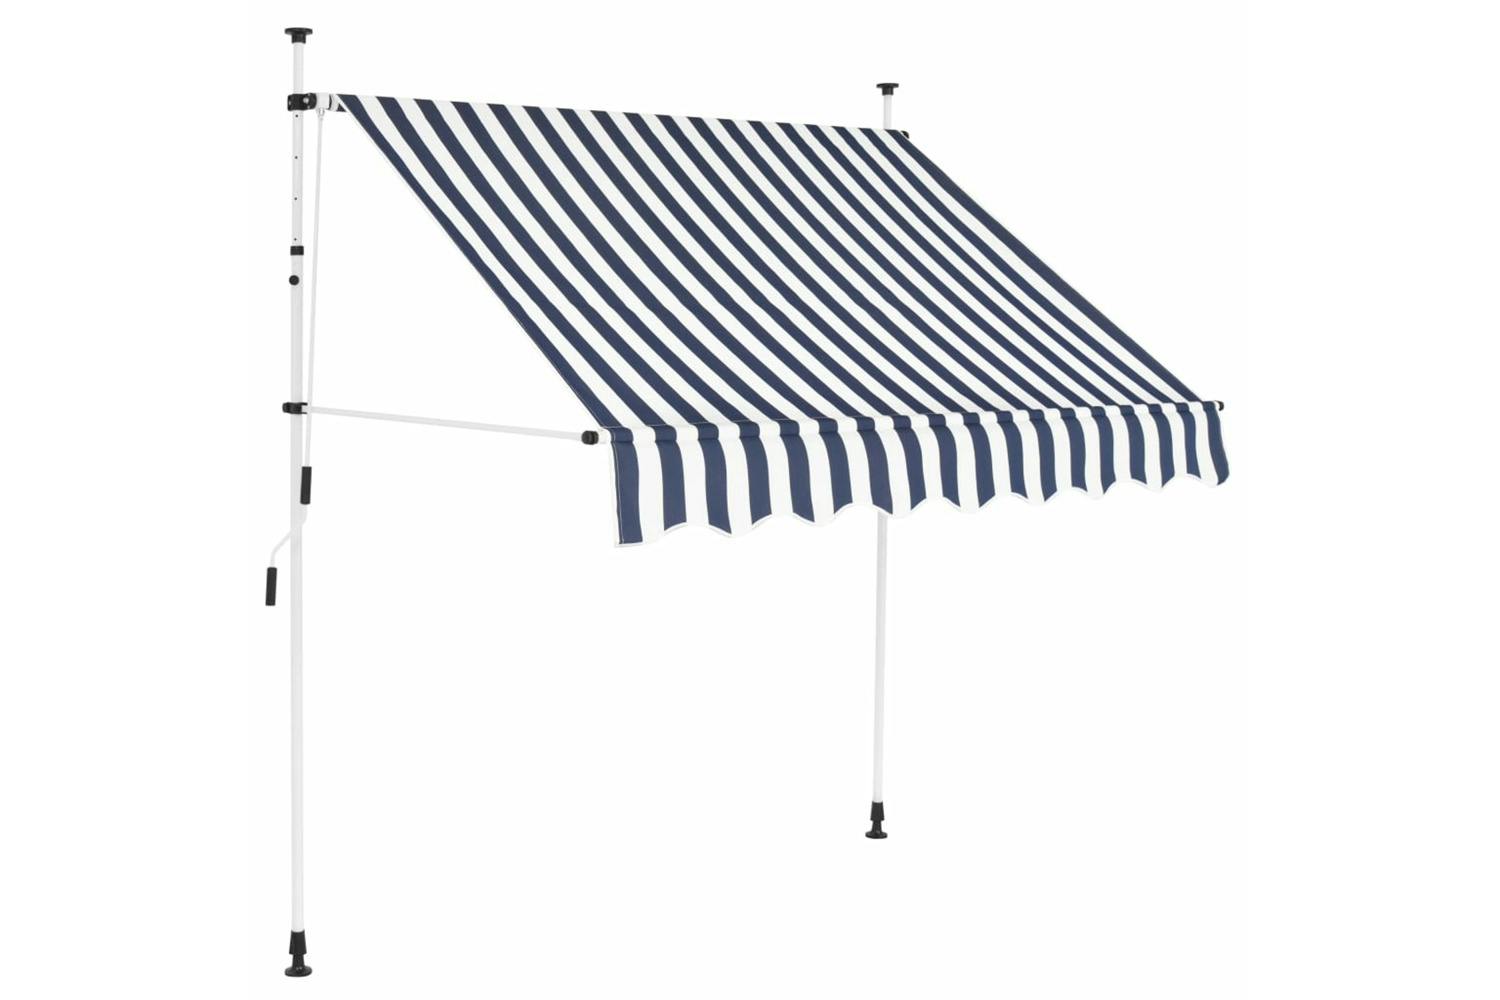 Vidaxl 43220 Manual Retractable Awning 200 Cm Blue And White Stripes